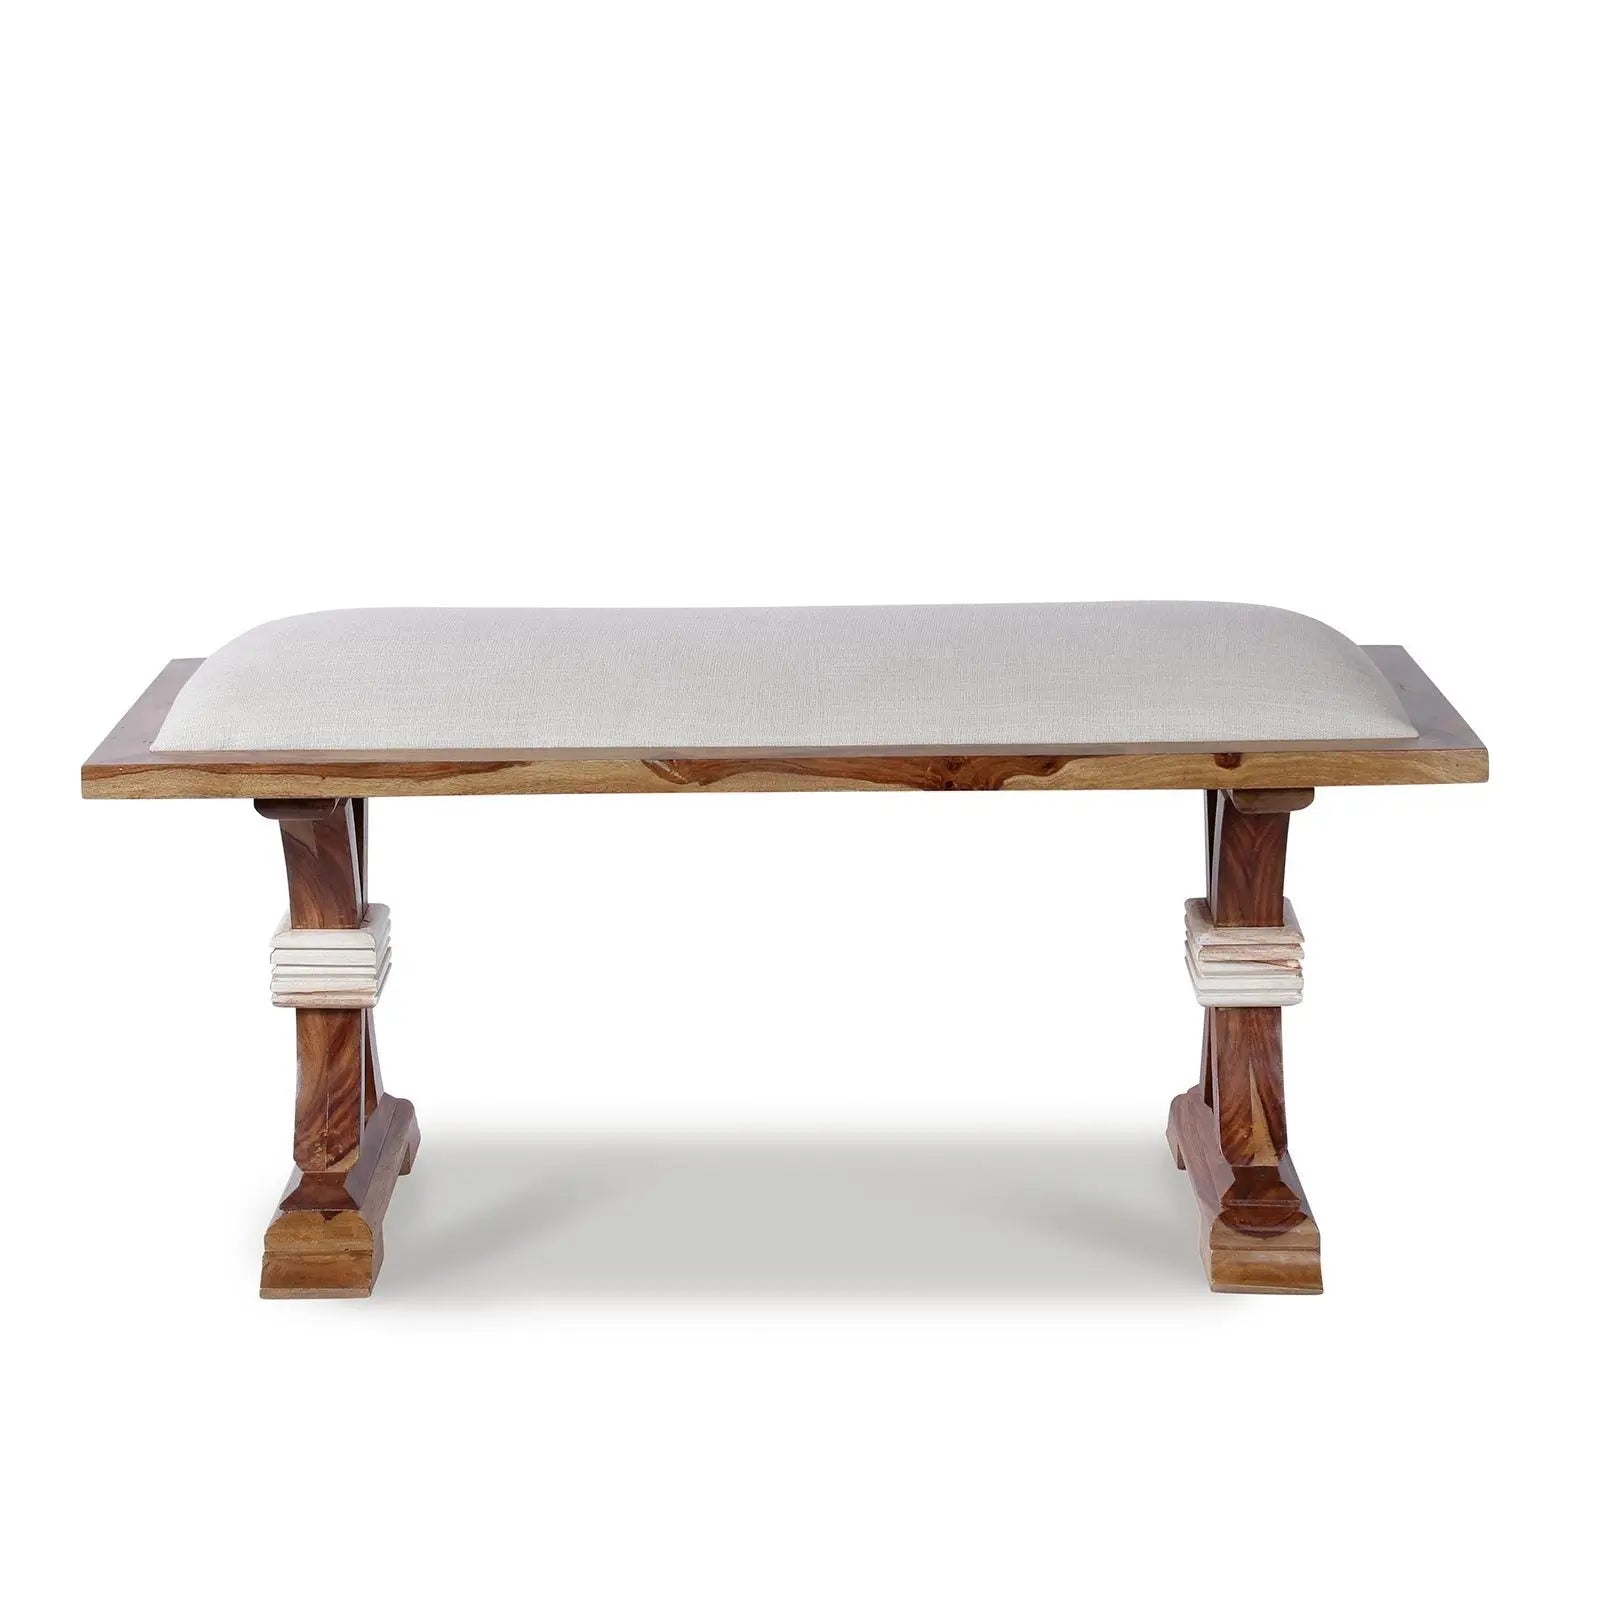 Buy dining table online